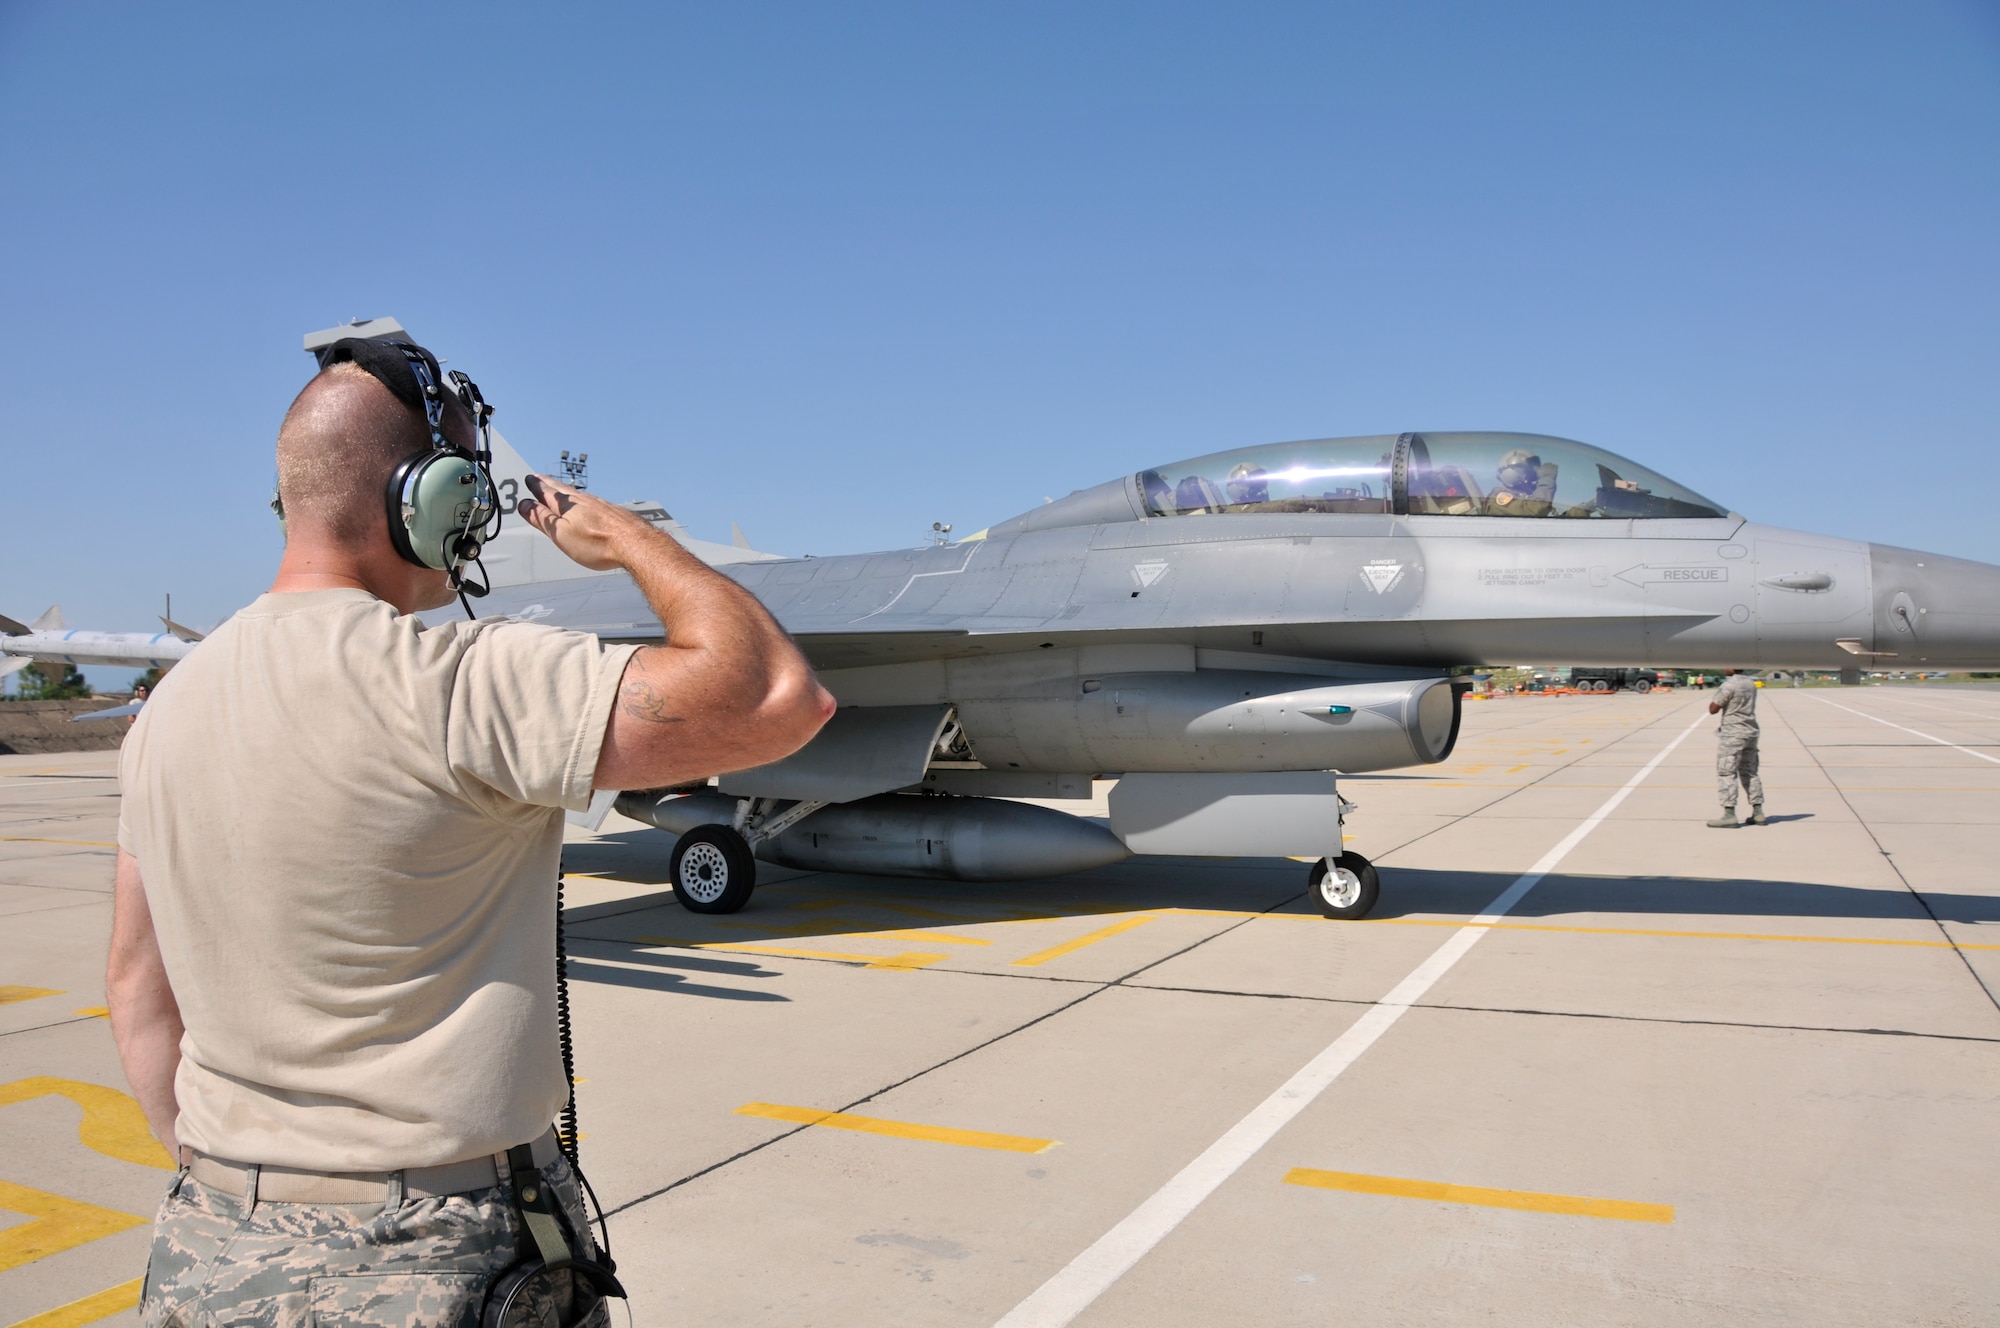 A picture of U.S. Air Force Senior Airman Mark Cavanaugh, crew chief with the 177th Fighter Wing of the New Jersey Air National Guard, saluting a pilot in a U.S. Air Force F-16D Fighting Falcon.